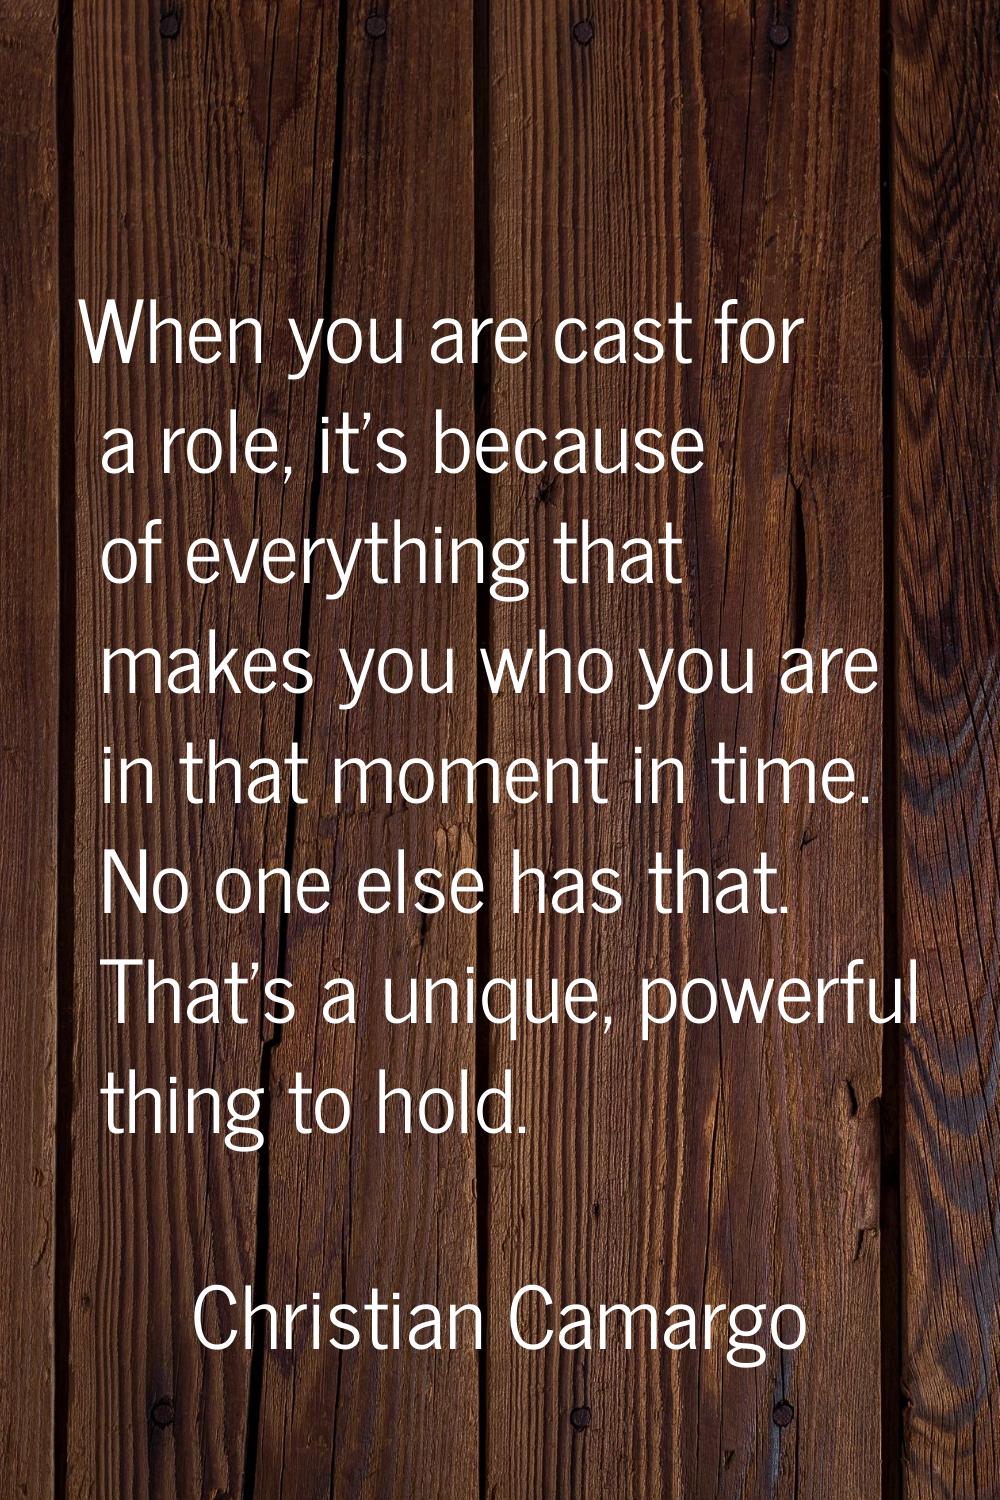 When you are cast for a role, it's because of everything that makes you who you are in that moment 